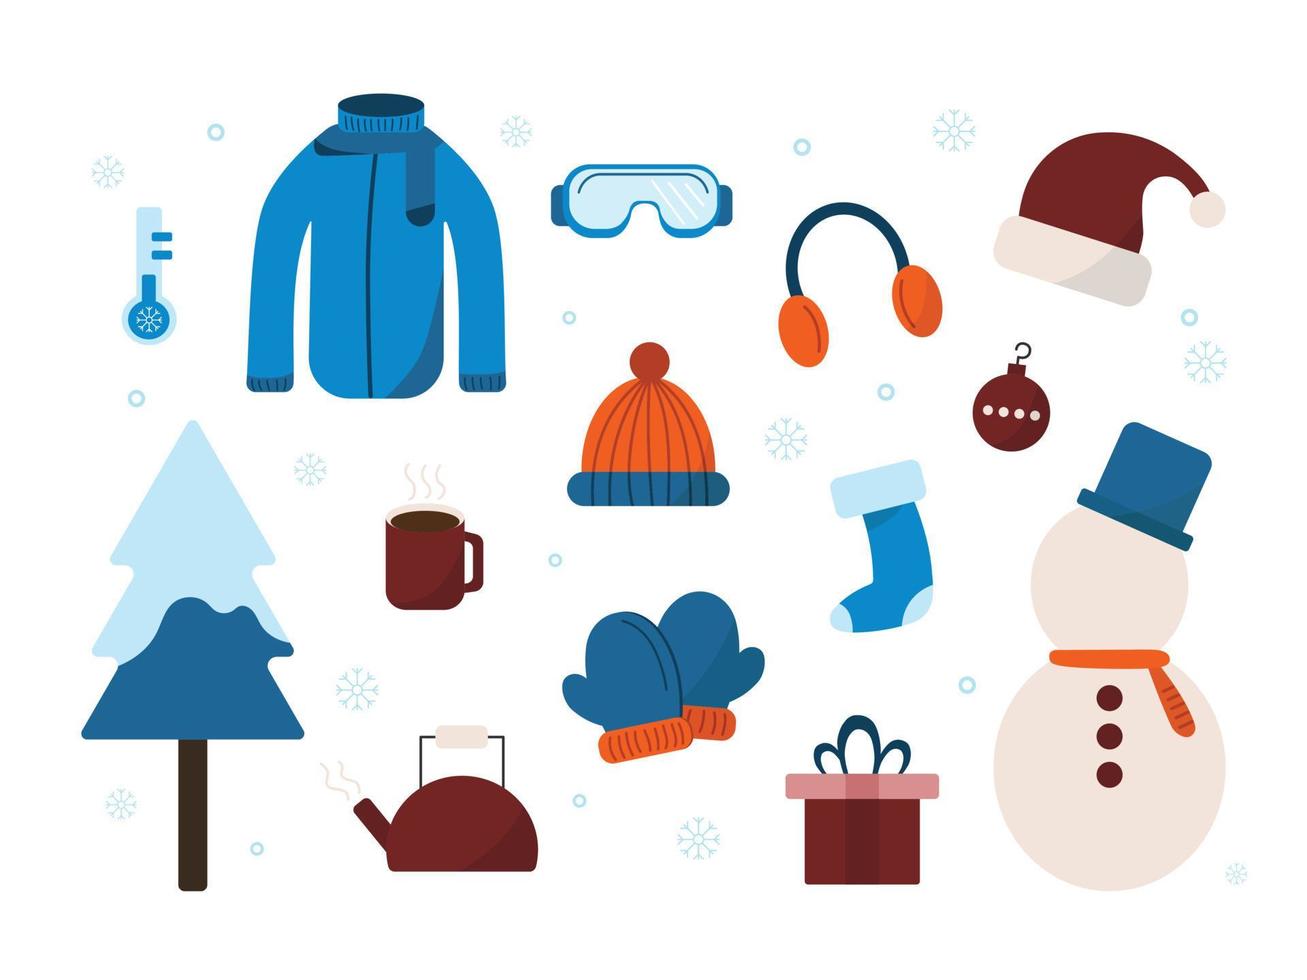 Winter elements set collection illustration. vector